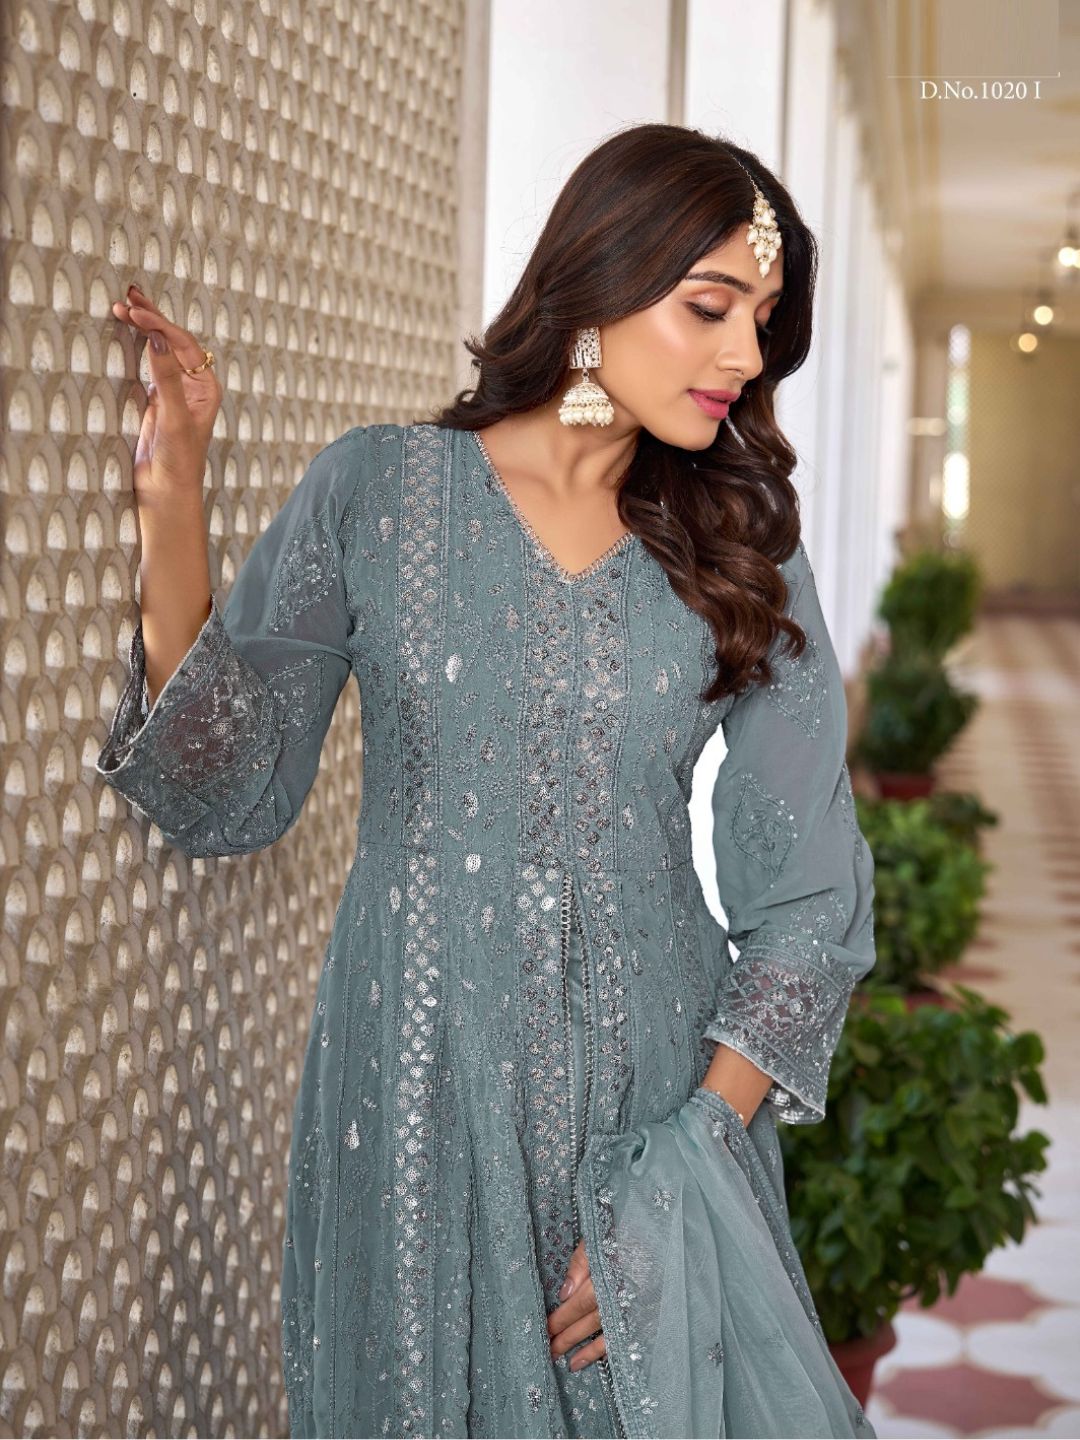 Georgette Embroidered Bollywood Salwar Kameez in Grey with Stone work-81987